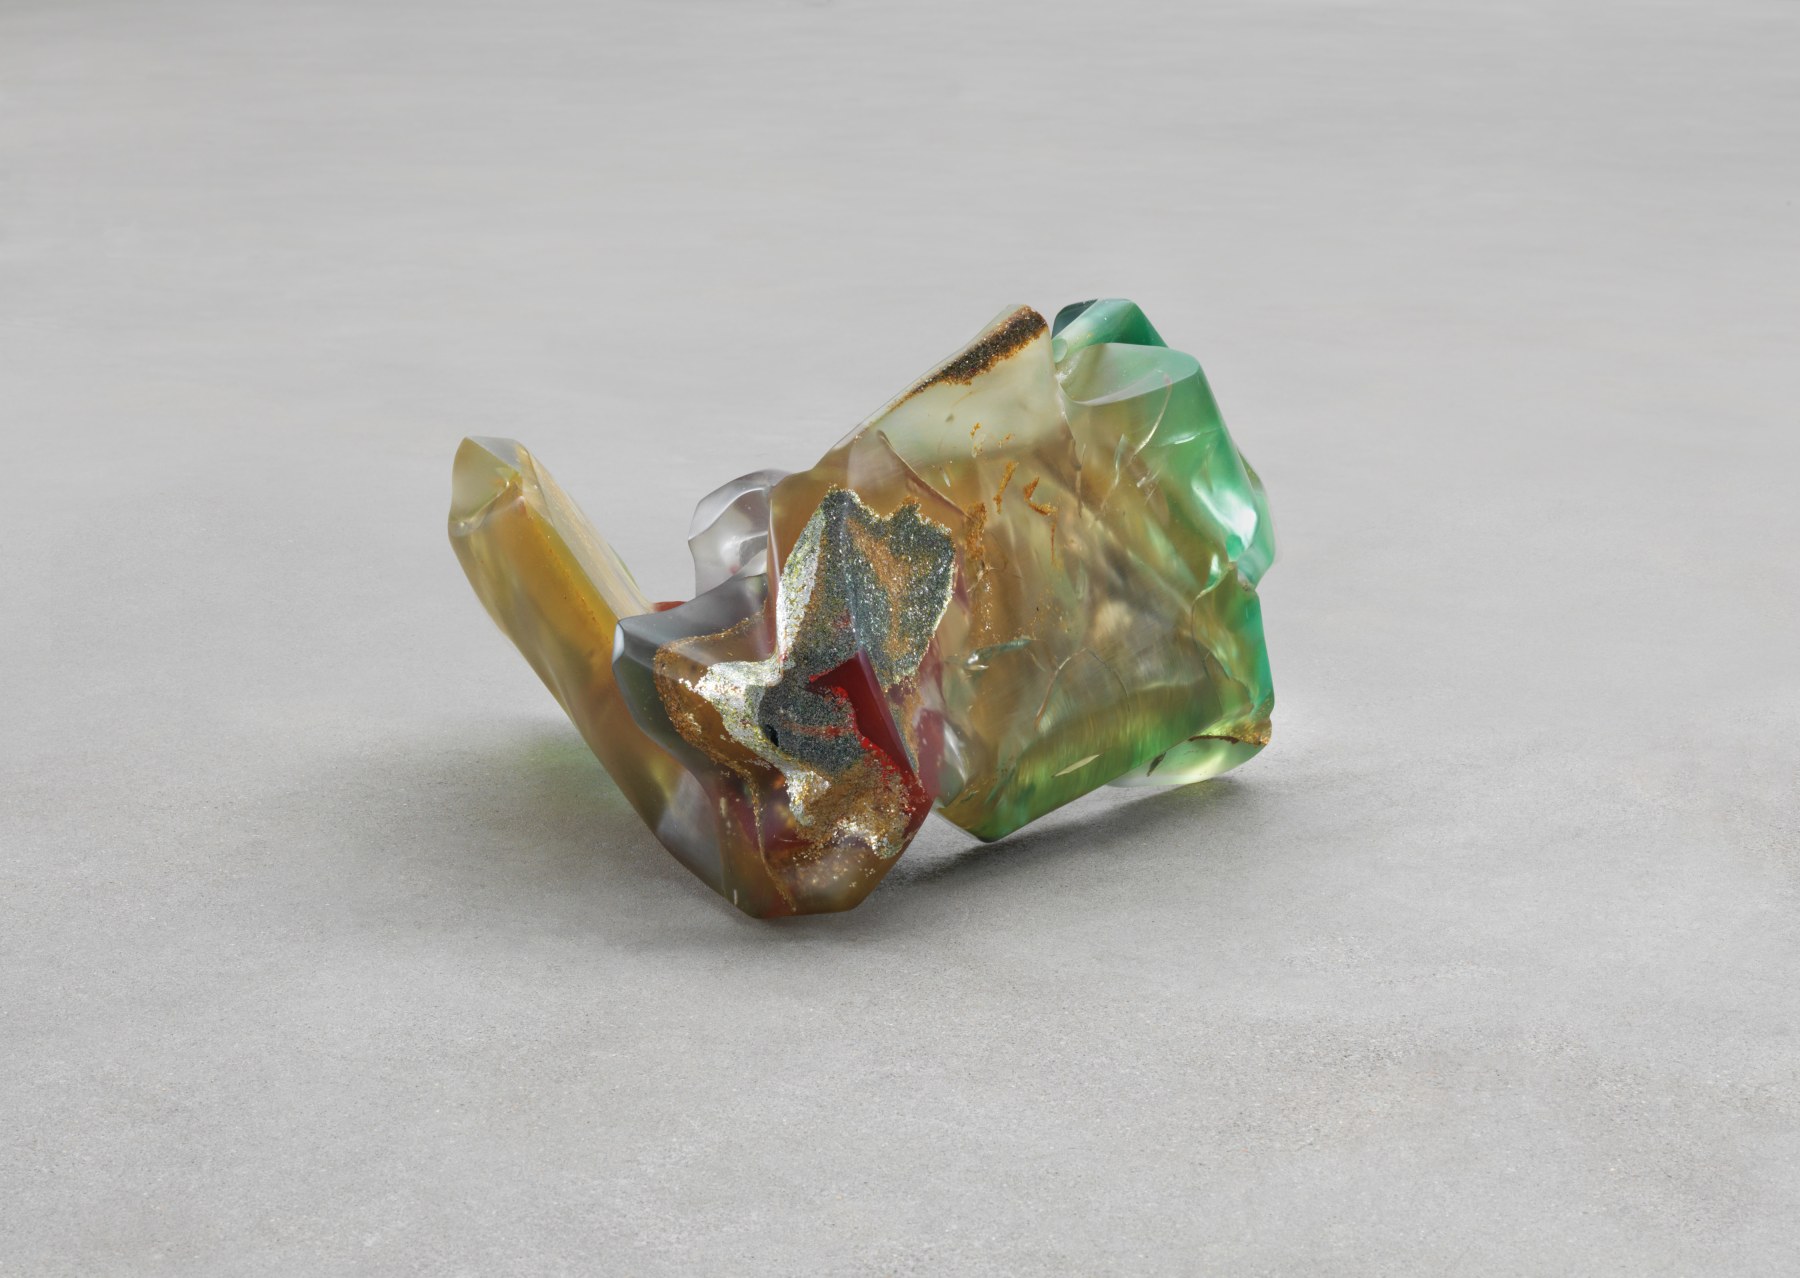 Bennington II, 1970, Polyester resin, milled glass, plaster, glitter, and dry pigment